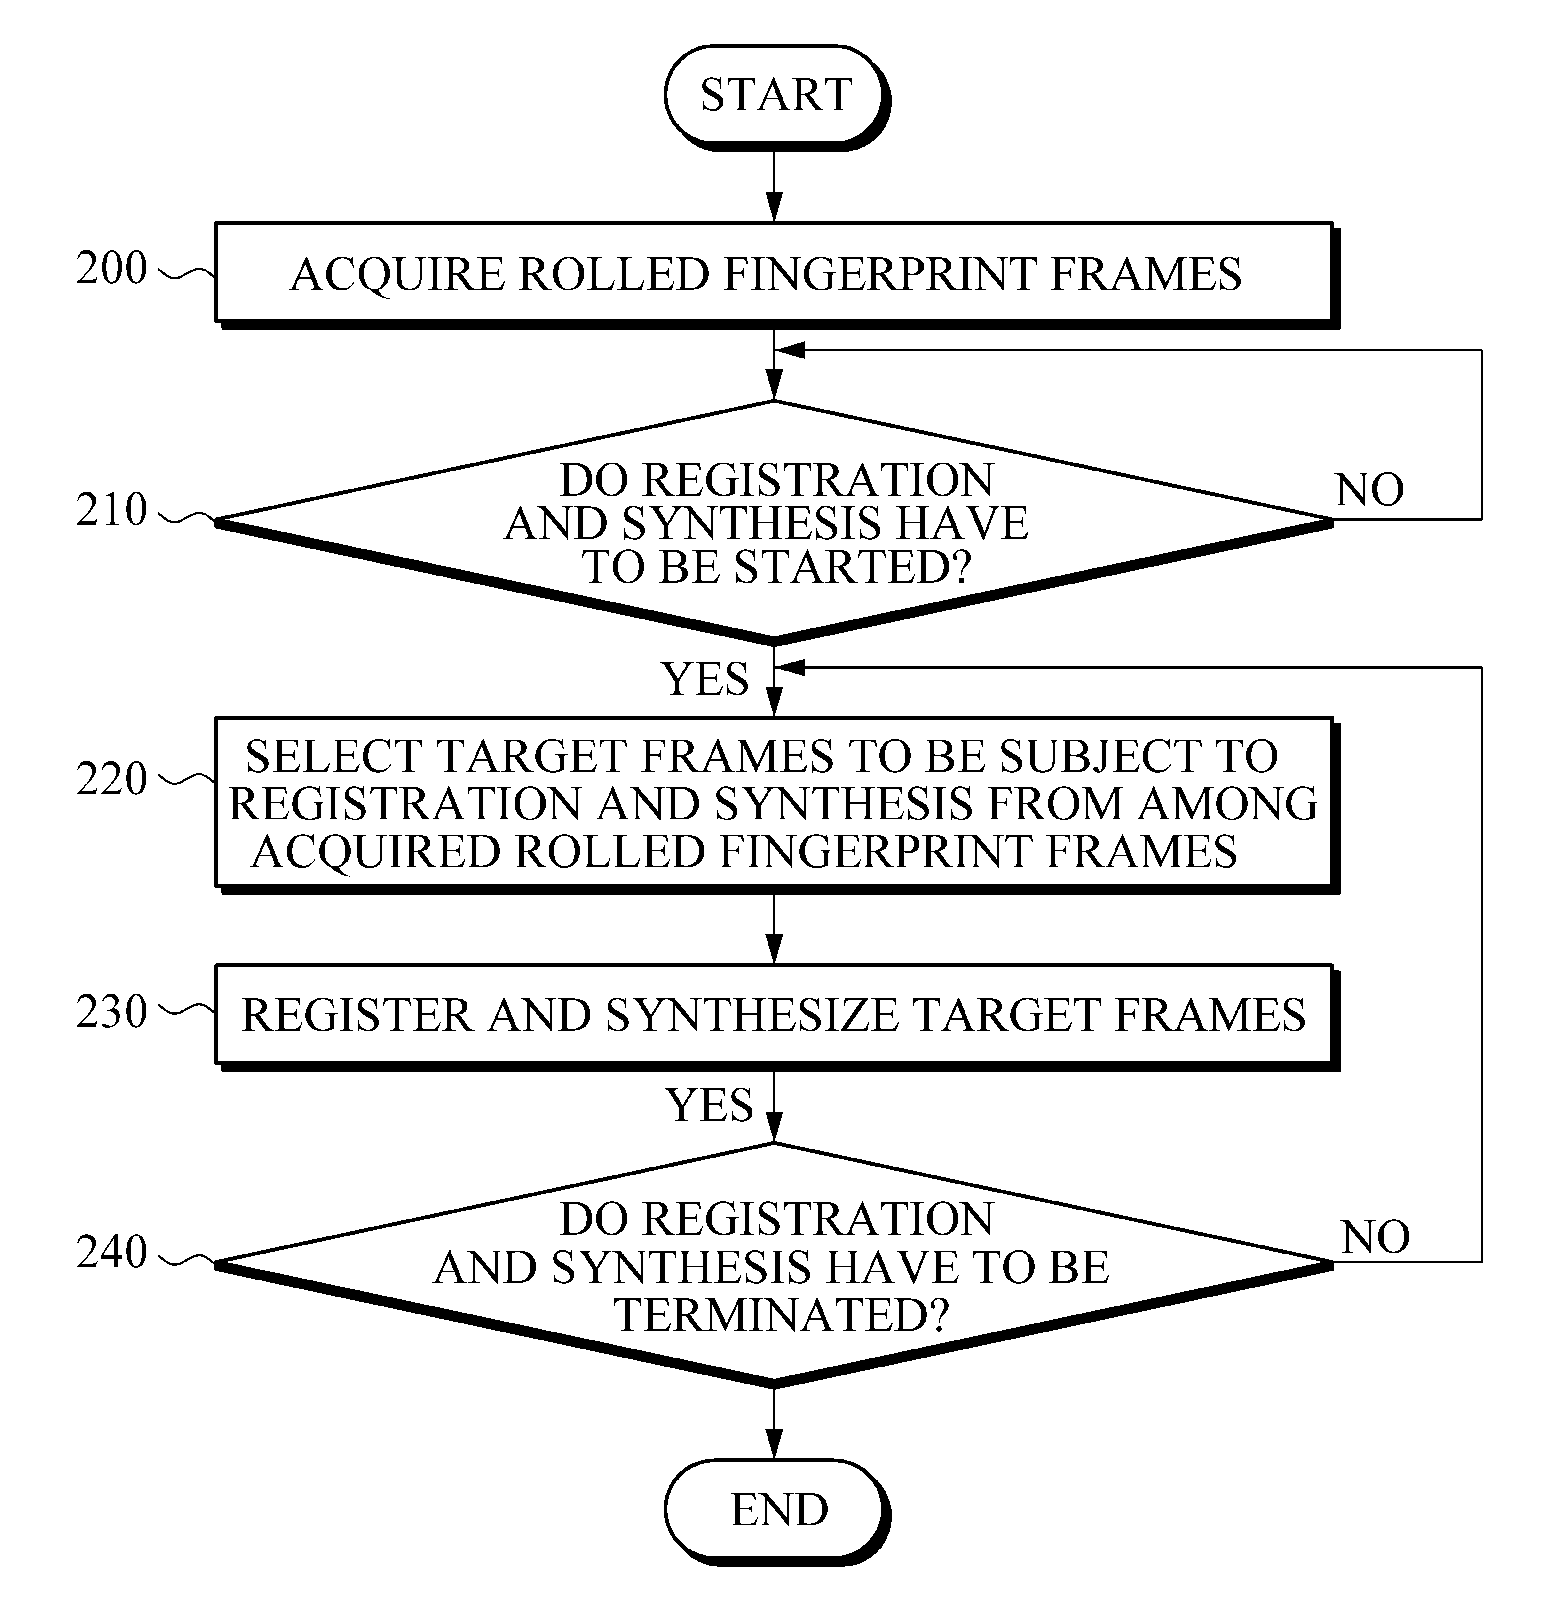 Rolled fingerprint acquisition apparatus and method for automatically detecting start and end of registration and synthesis